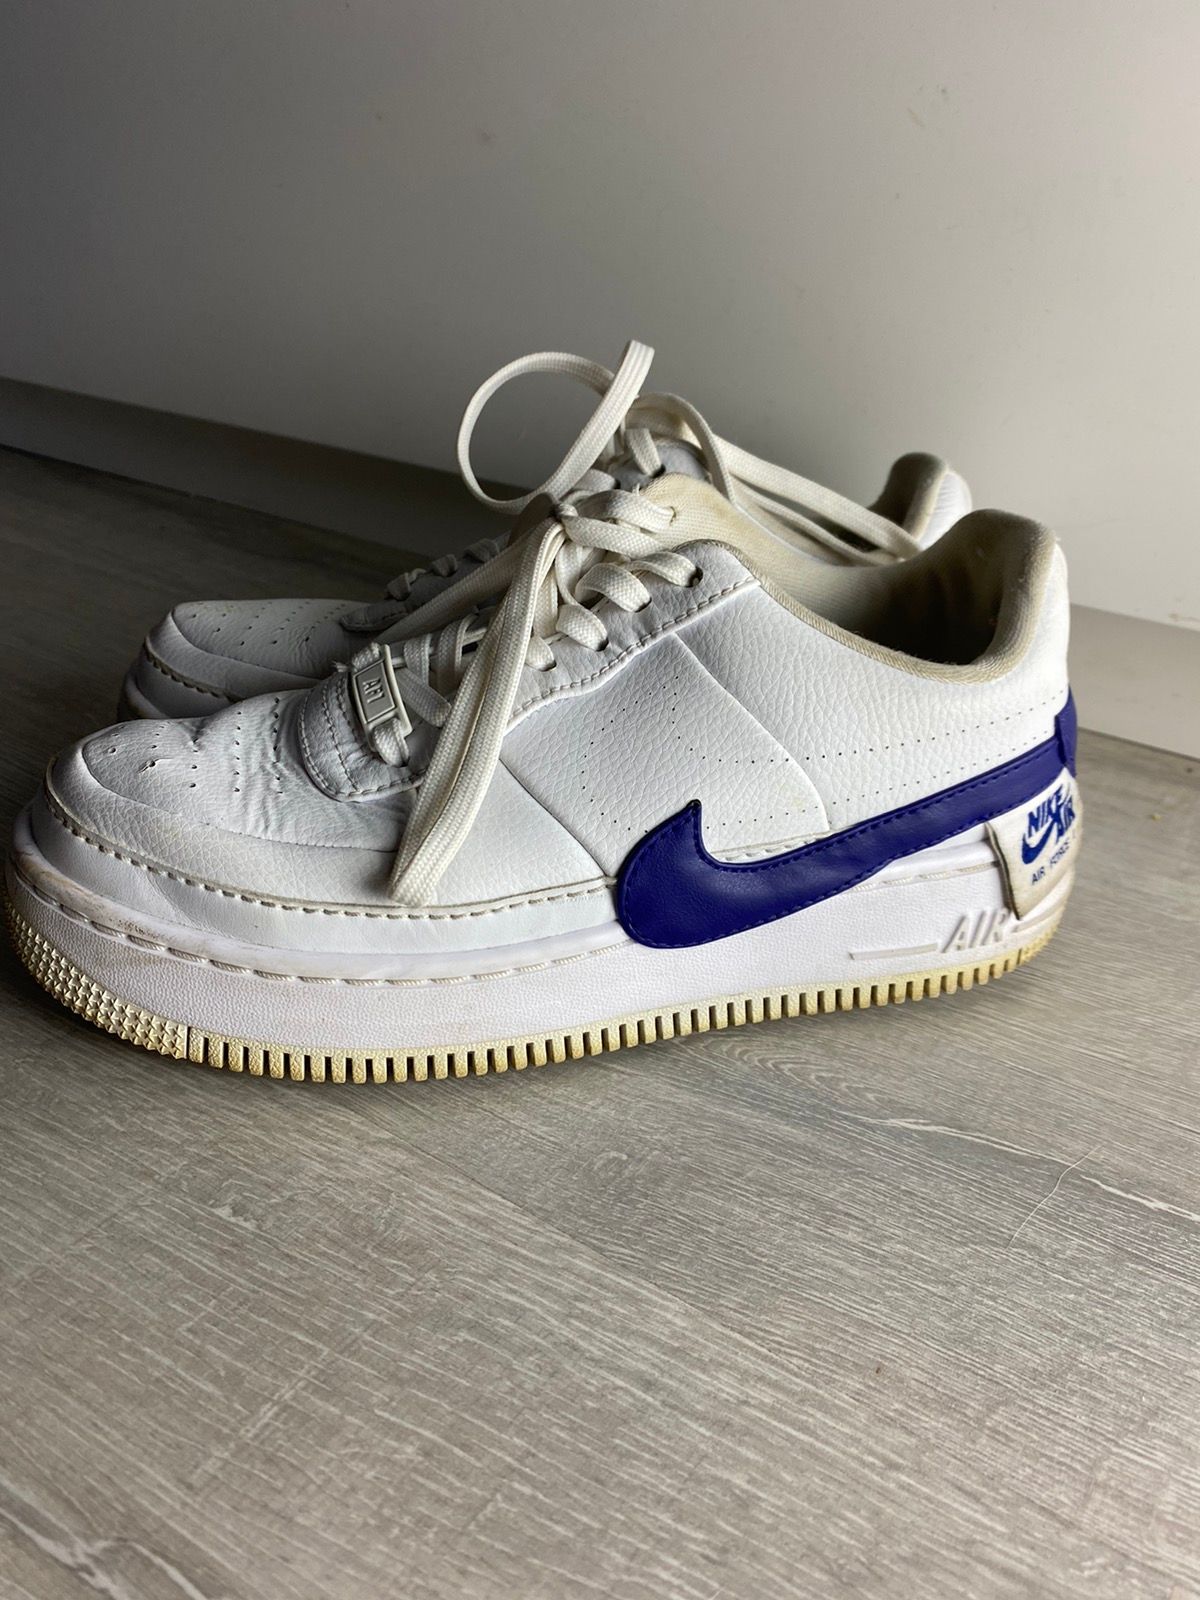 Nike Nike Air Force 1 Jester white af1 low A   Grailed